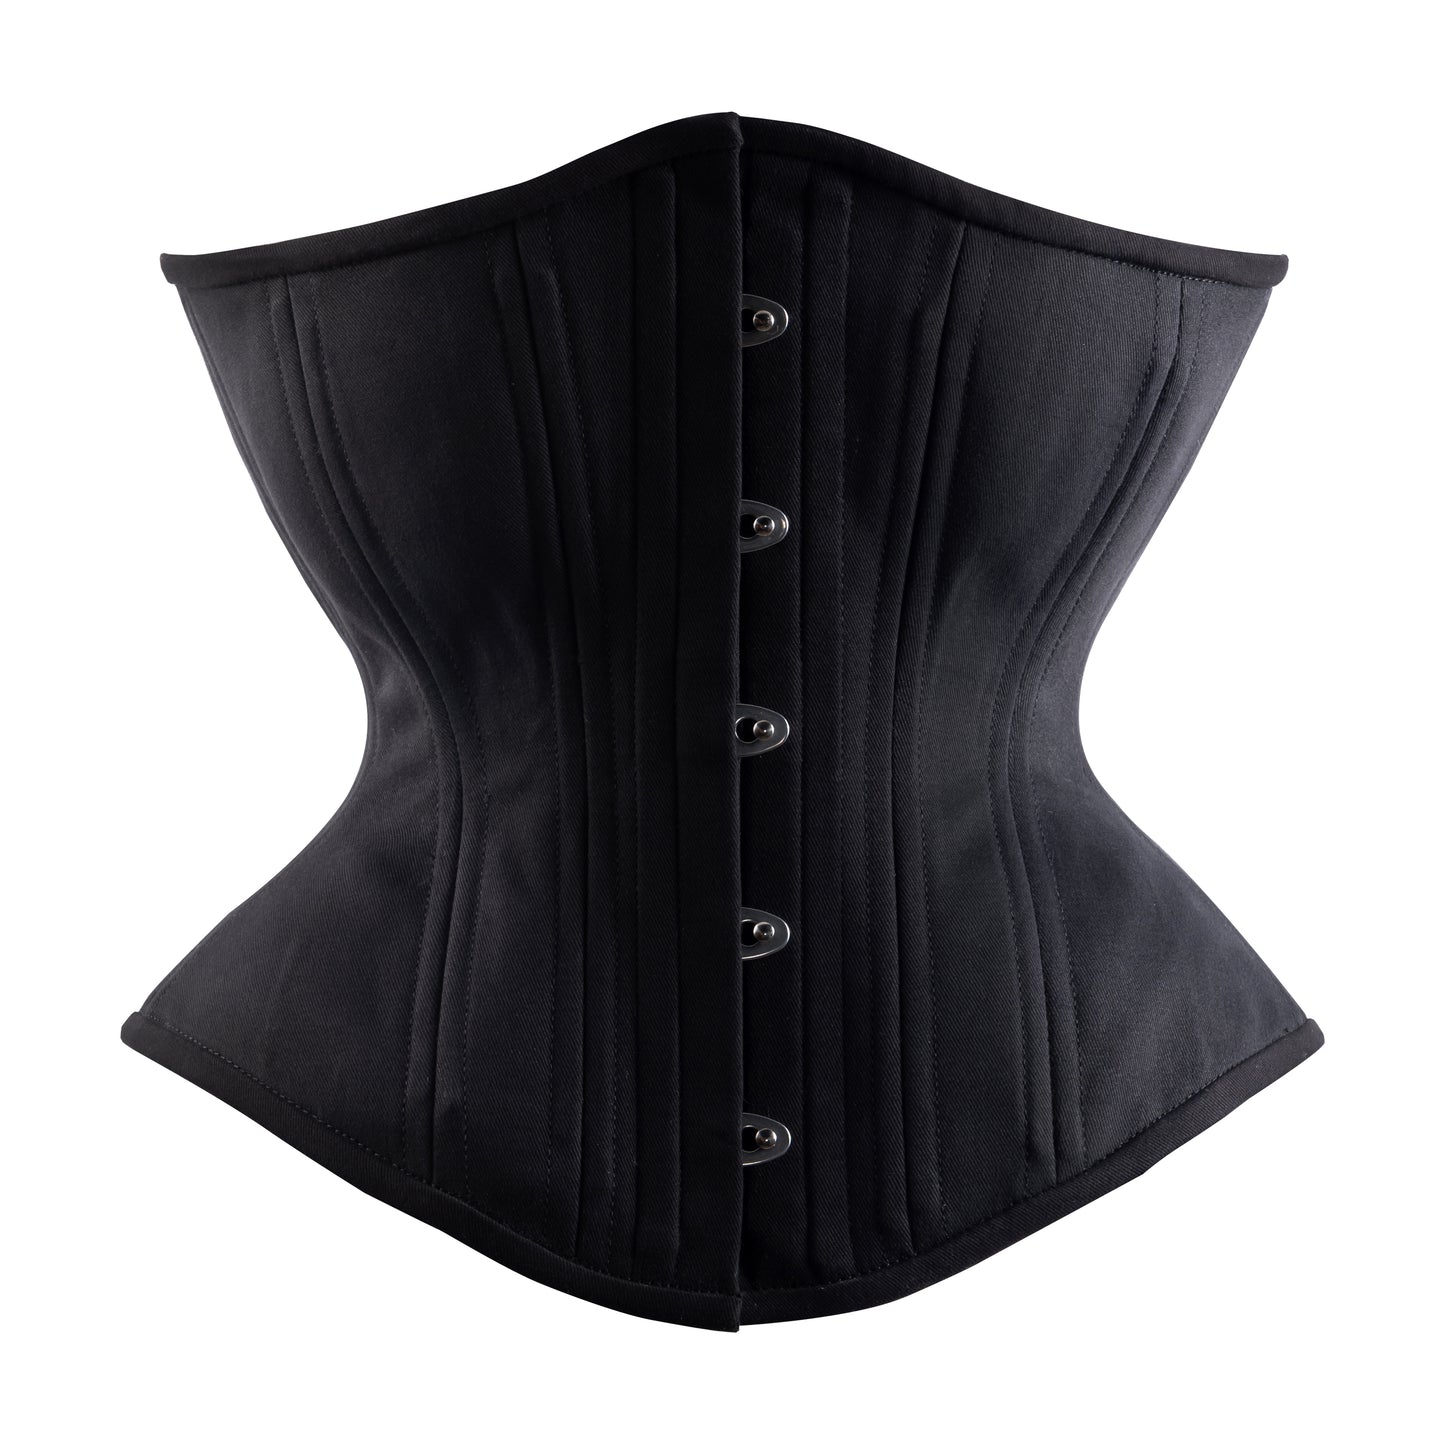 DARK VIRTUE DESIGNS on X: Made a 20 inch corset today. My natural waist is  27 inches. I got it to lace down to 22 inches so stoked with 5 inches  reduction.